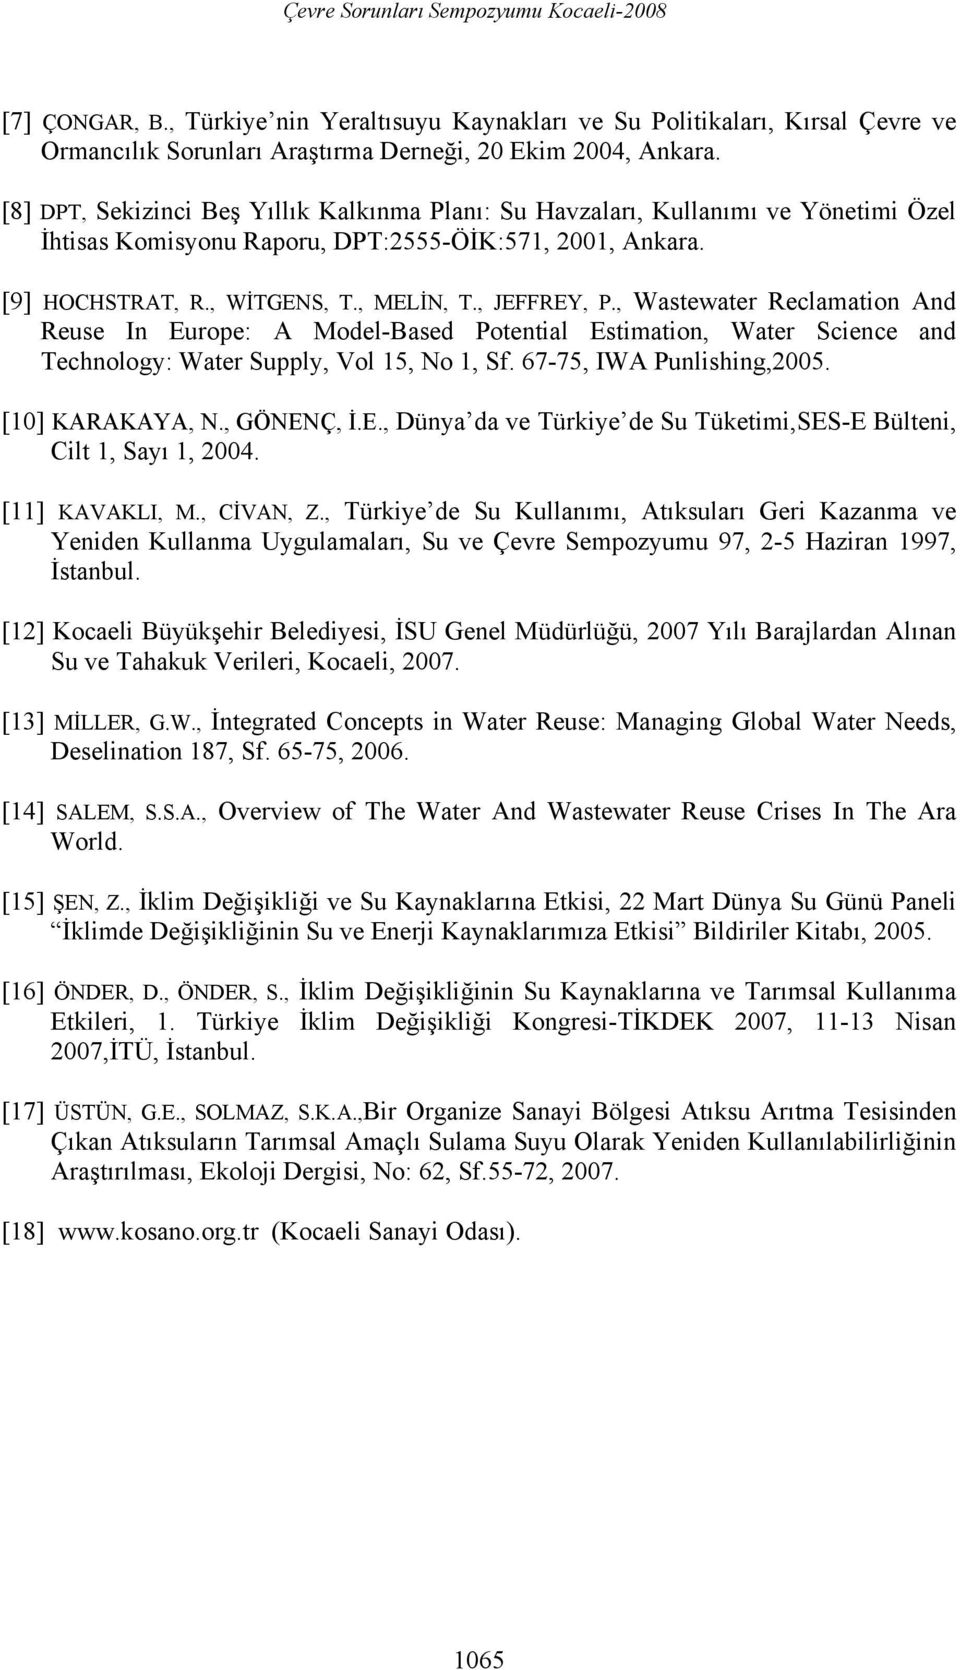 , Wastewater Reclamation And Reuse In Europe: A Model-Based Potential Estimation, Water Science and Technology: Water Supply, Vol 15, No 1, Sf. 67-75, IWA Punlishing,2005. [10] KARAKAYA, N.